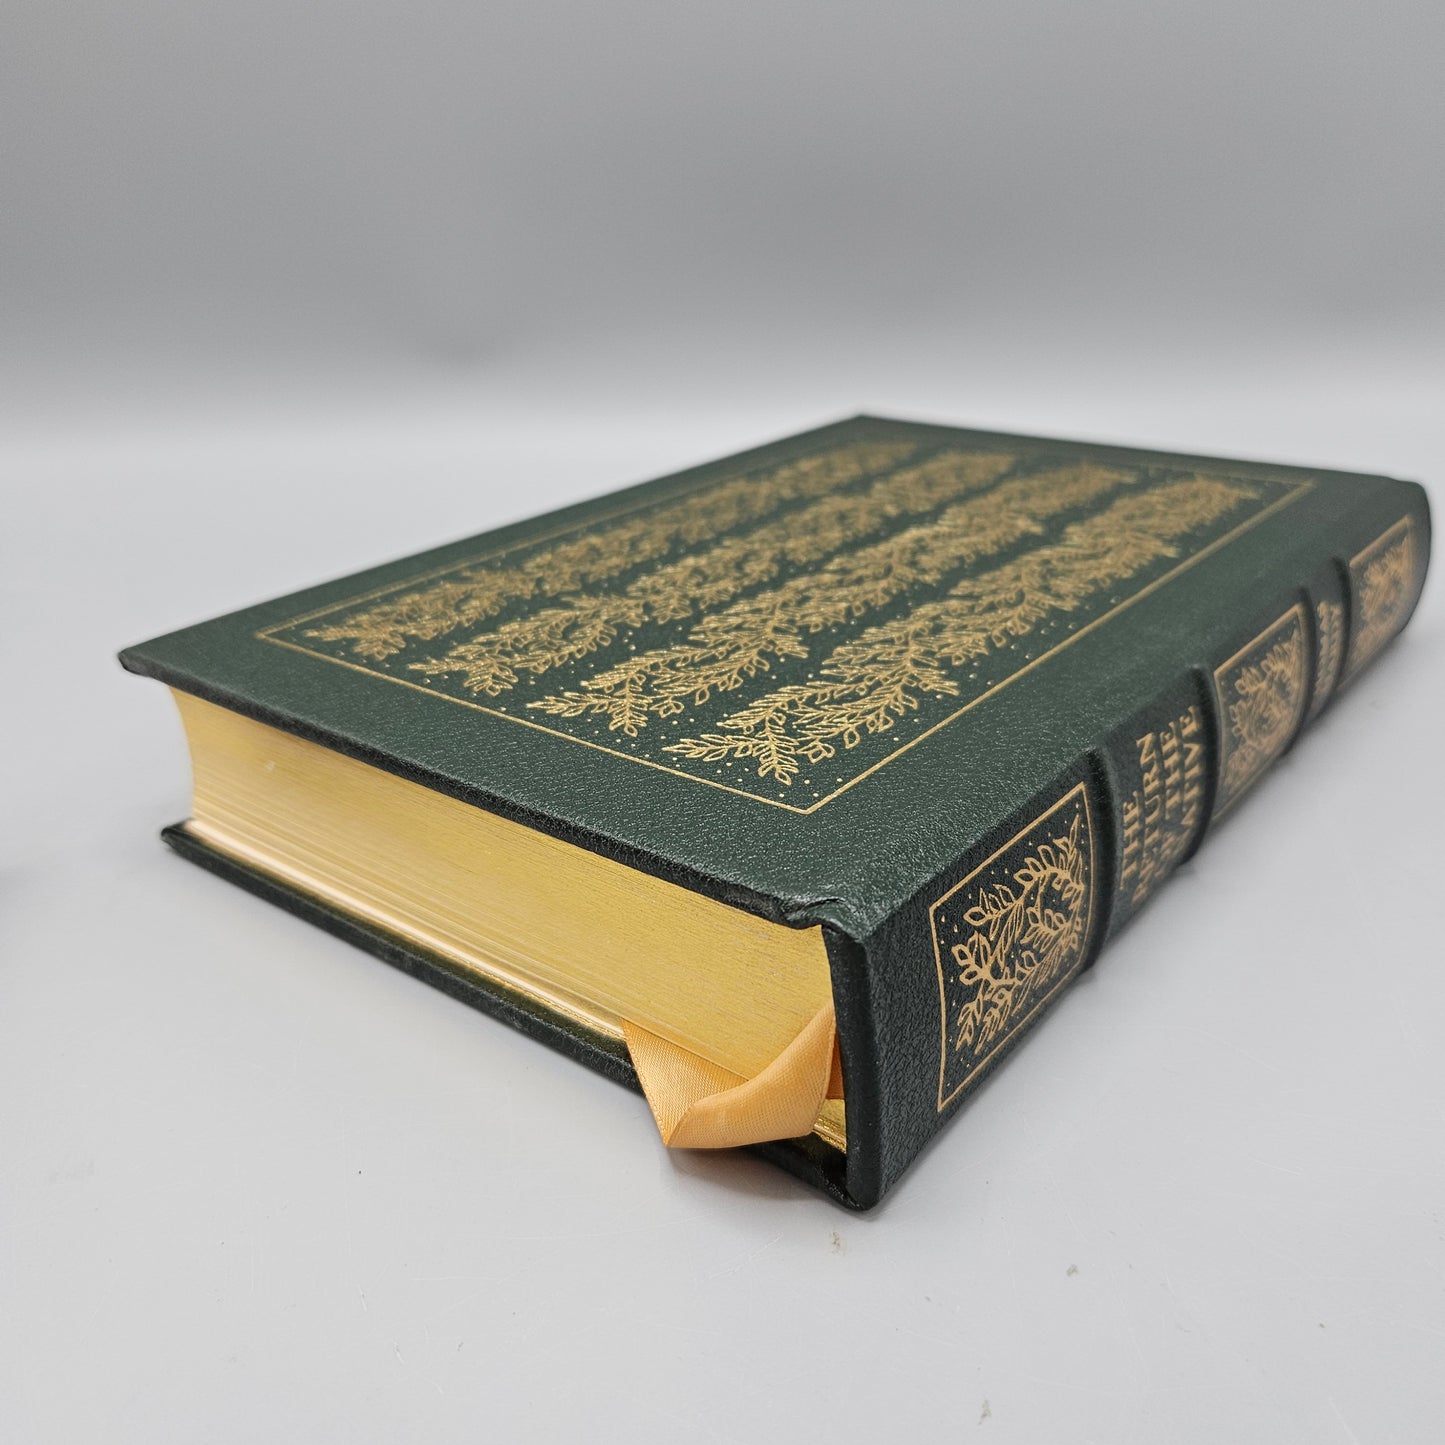 Leatherbound Book - Thomas Hardy "The Return of the Native" Easton Press